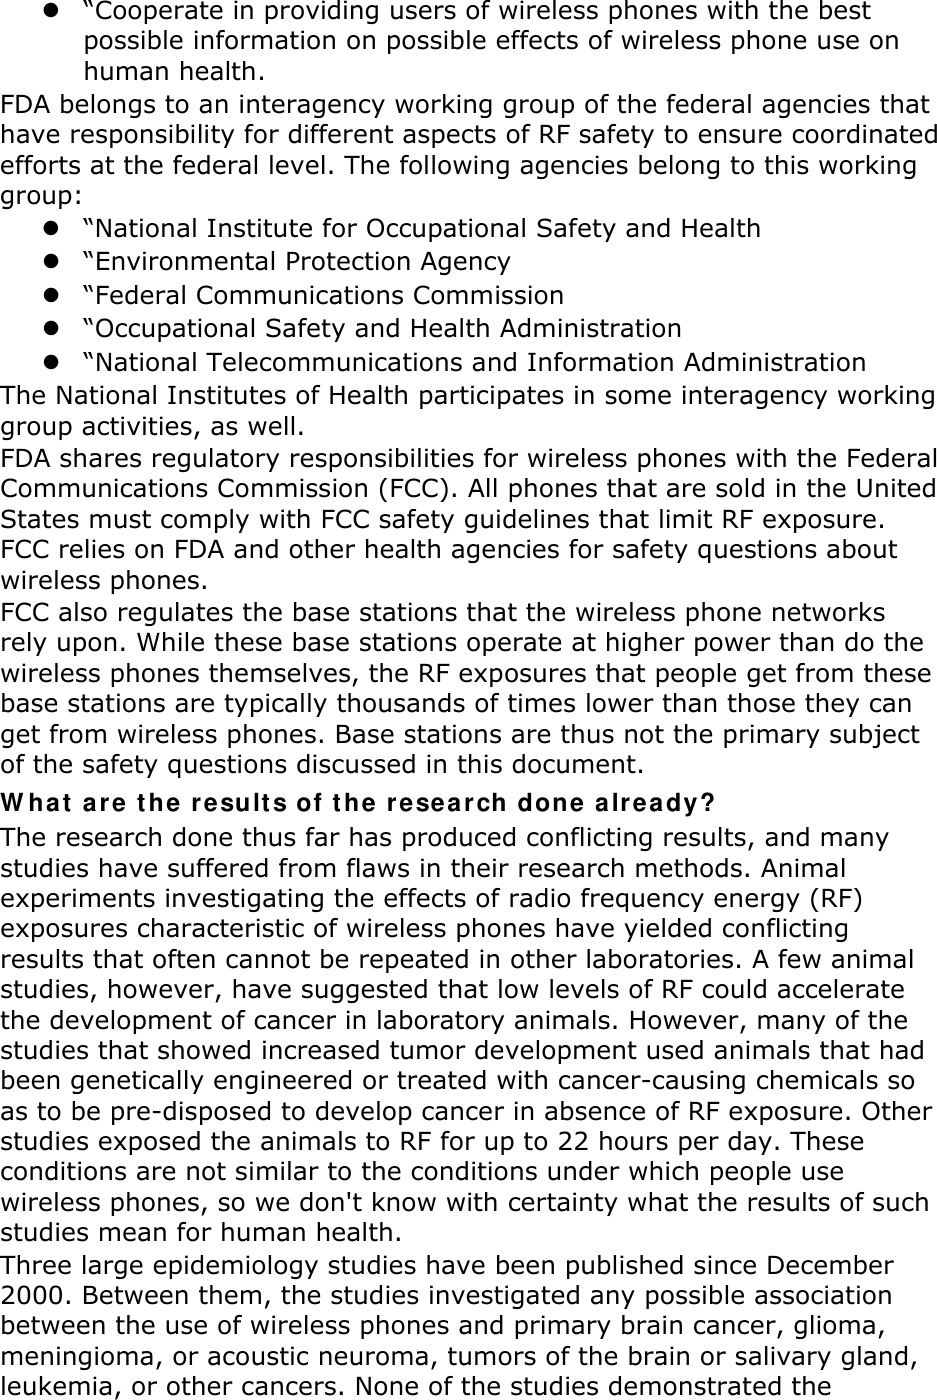  “Cooperate in providing users of wireless phones with the best possible information on possible effects of wireless phone use on human health. FDA belongs to an interagency working group of the federal agencies that have responsibility for different aspects of RF safety to ensure coordinated efforts at the federal level. The following agencies belong to this working group:  “National Institute for Occupational Safety and Health  “Environmental Protection Agency  “Federal Communications Commission  “Occupational Safety and Health Administration  “National Telecommunications and Information Administration The National Institutes of Health participates in some interagency working group activities, as well. FDA shares regulatory responsibilities for wireless phones with the Federal Communications Commission (FCC). All phones that are sold in the United States must comply with FCC safety guidelines that limit RF exposure. FCC relies on FDA and other health agencies for safety questions about wireless phones. FCC also regulates the base stations that the wireless phone networks rely upon. While these base stations operate at higher power than do the wireless phones themselves, the RF exposures that people get from these base stations are typically thousands of times lower than those they can get from wireless phones. Base stations are thus not the primary subject of the safety questions discussed in this document. W ha t  a re t h e  re sult s of t he re sea r ch done a lr ea dy? The research done thus far has produced conflicting results, and many studies have suffered from flaws in their research methods. Animal experiments investigating the effects of radio frequency energy (RF) exposures characteristic of wireless phones have yielded conflicting results that often cannot be repeated in other laboratories. A few animal studies, however, have suggested that low levels of RF could accelerate the development of cancer in laboratory animals. However, many of the studies that showed increased tumor development used animals that had been genetically engineered or treated with cancer-causing chemicals so as to be pre-disposed to develop cancer in absence of RF exposure. Other studies exposed the animals to RF for up to 22 hours per day. These conditions are not similar to the conditions under which people use wireless phones, so we don&apos;t know with certainty what the results of such studies mean for human health. Three large epidemiology studies have been published since December 2000. Between them, the studies investigated any possible association between the use of wireless phones and primary brain cancer, glioma, meningioma, or acoustic neuroma, tumors of the brain or salivary gland, leukemia, or other cancers. None of the studies demonstrated the 